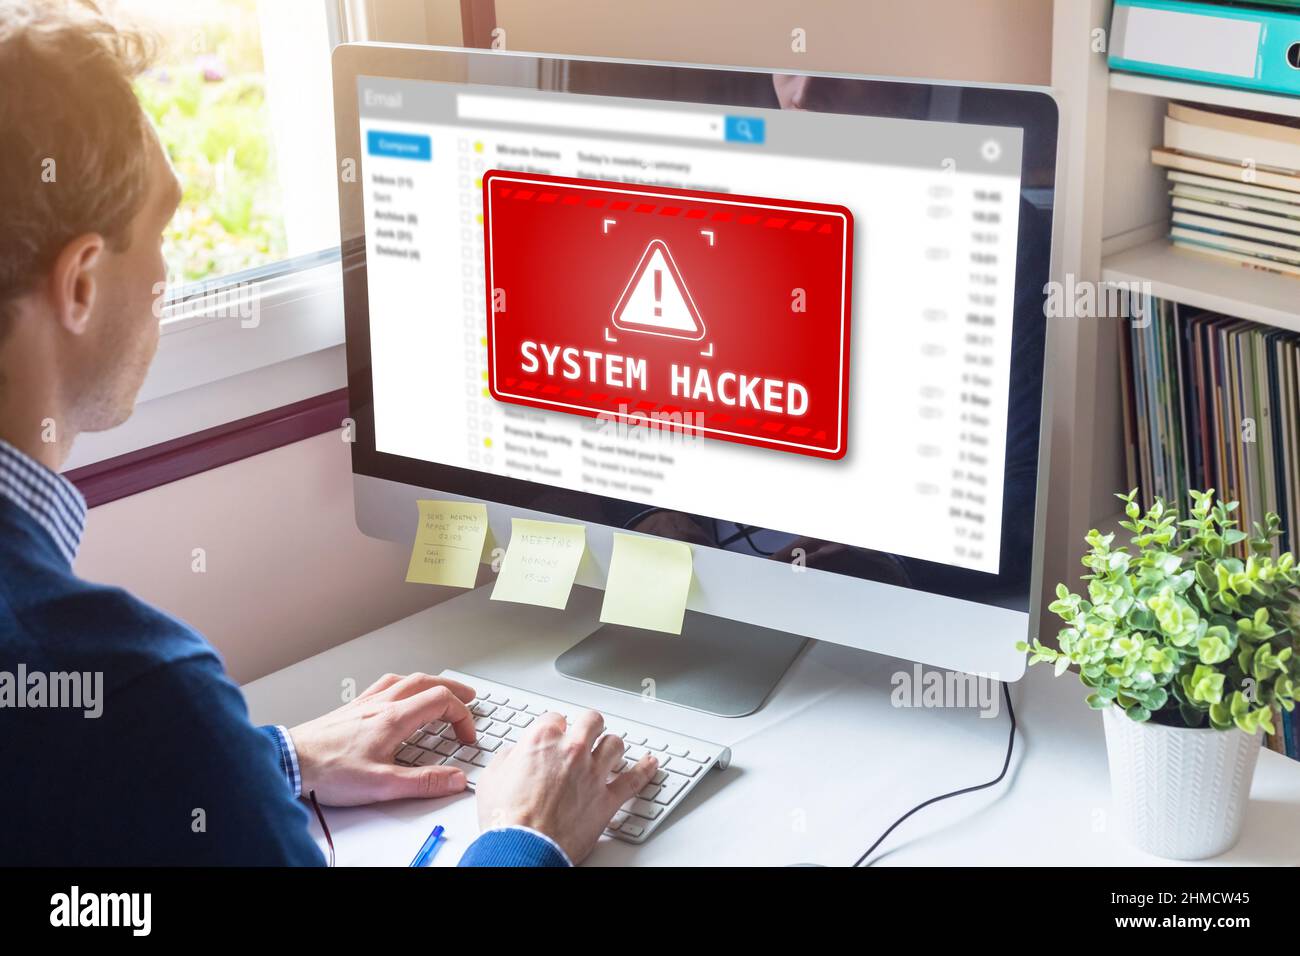 System hacked alert on computer screen after cyber attack on network. Cybersecurity vulnerability on internet, virus, data breach, malicious connectio Stock Photo